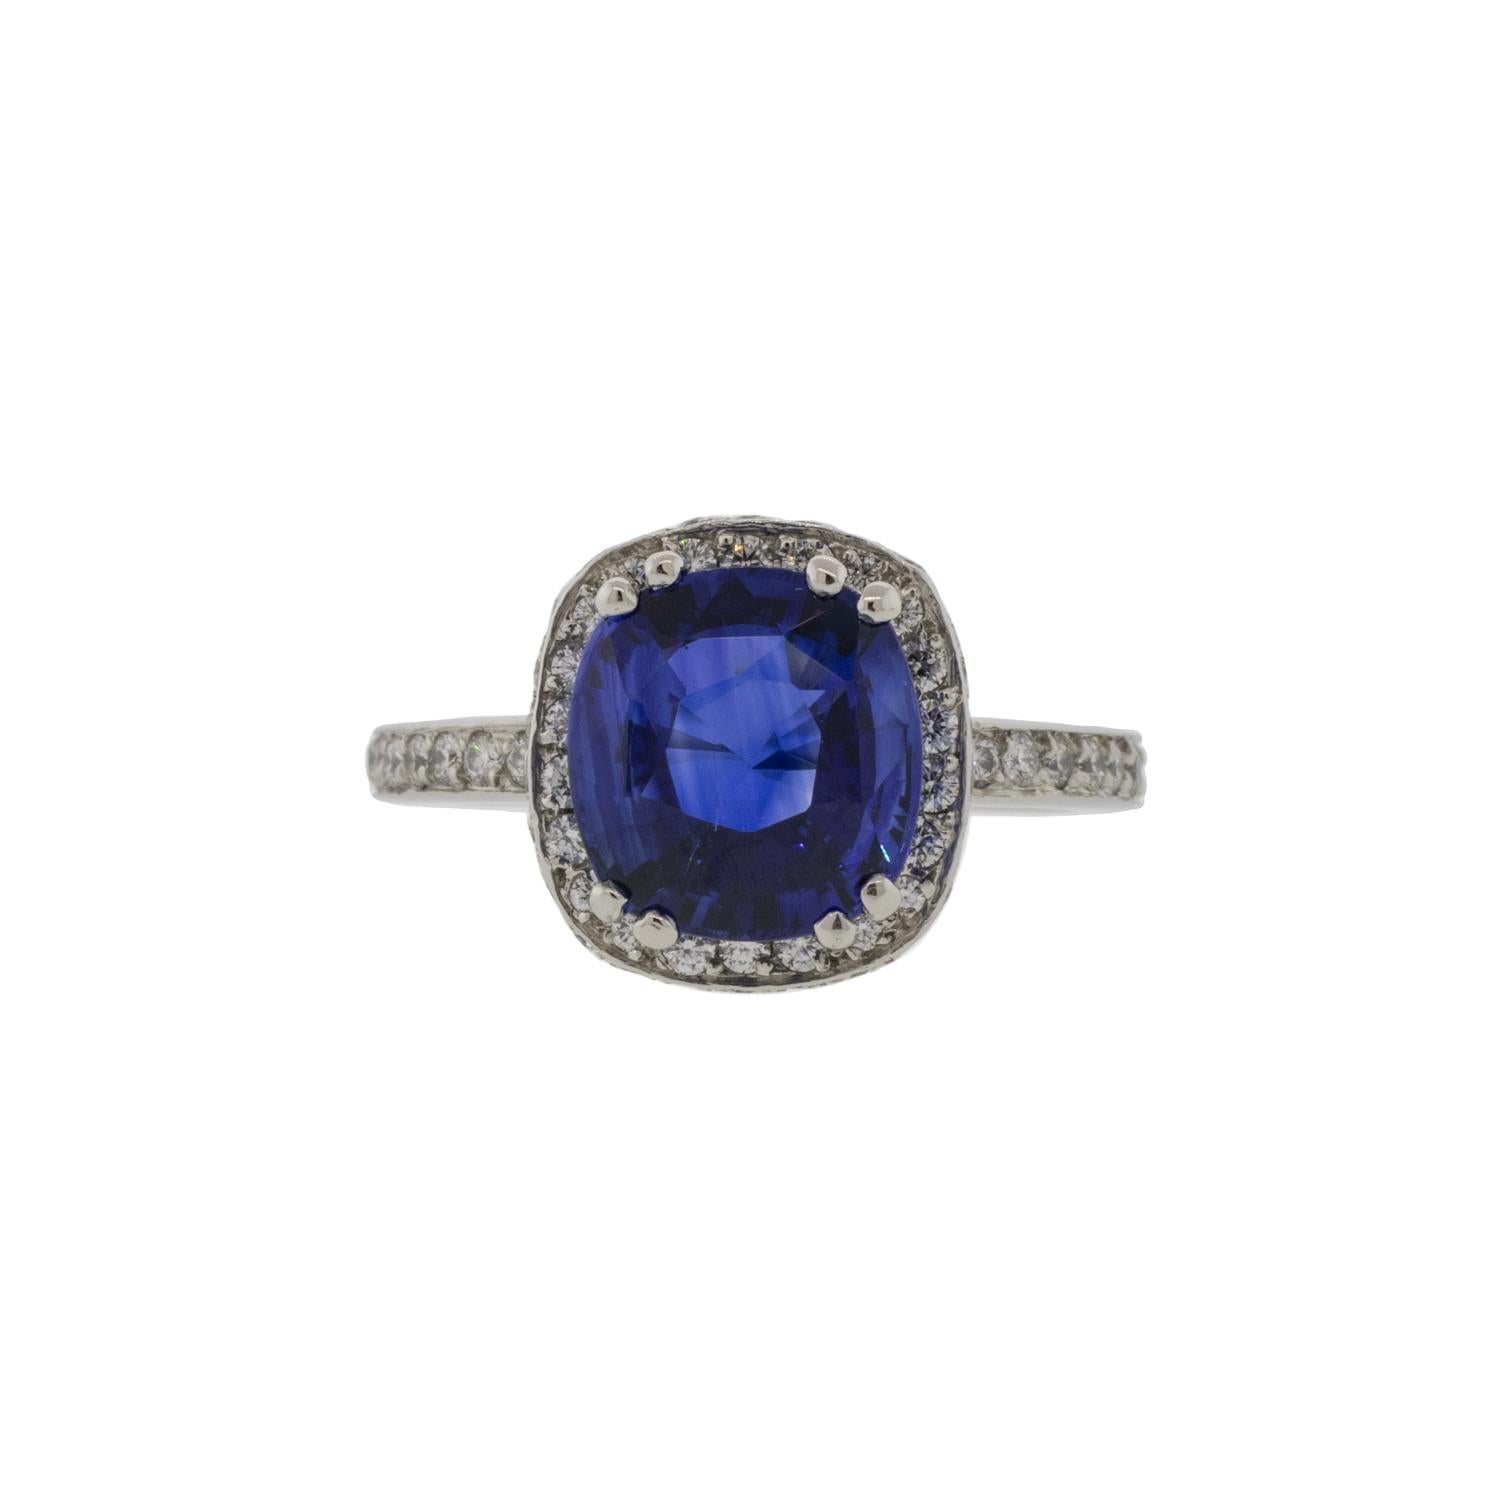 A gorgeous estate find, that is a total showstopper. The 3.67ct Sapphire is prong set securely to a platinum band. The halo and band is decorated with collection of melee diamonds ranging from G-H in color and VS2-SI1 in clarity with the total